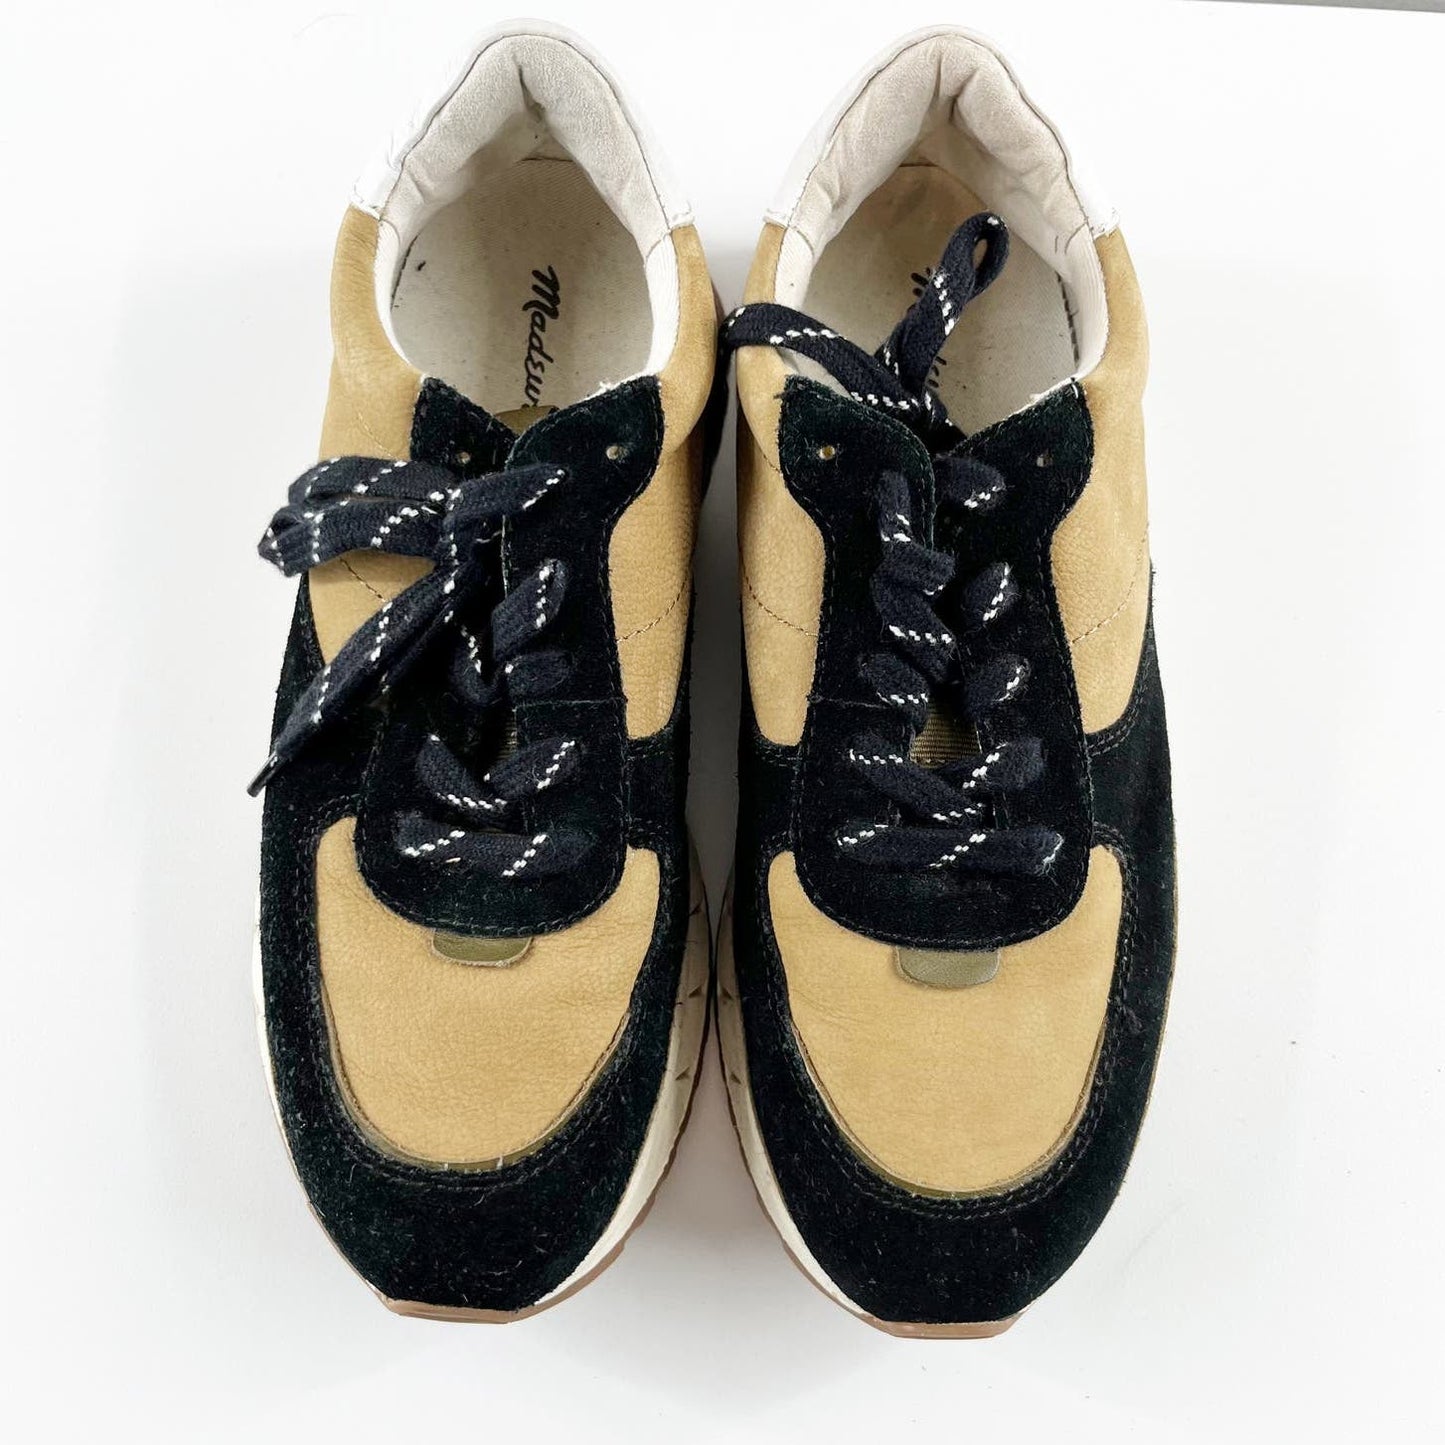 Madewell Kickoff Trainer Sneakers in Nubuck Suede Leather Tan Black 7.5